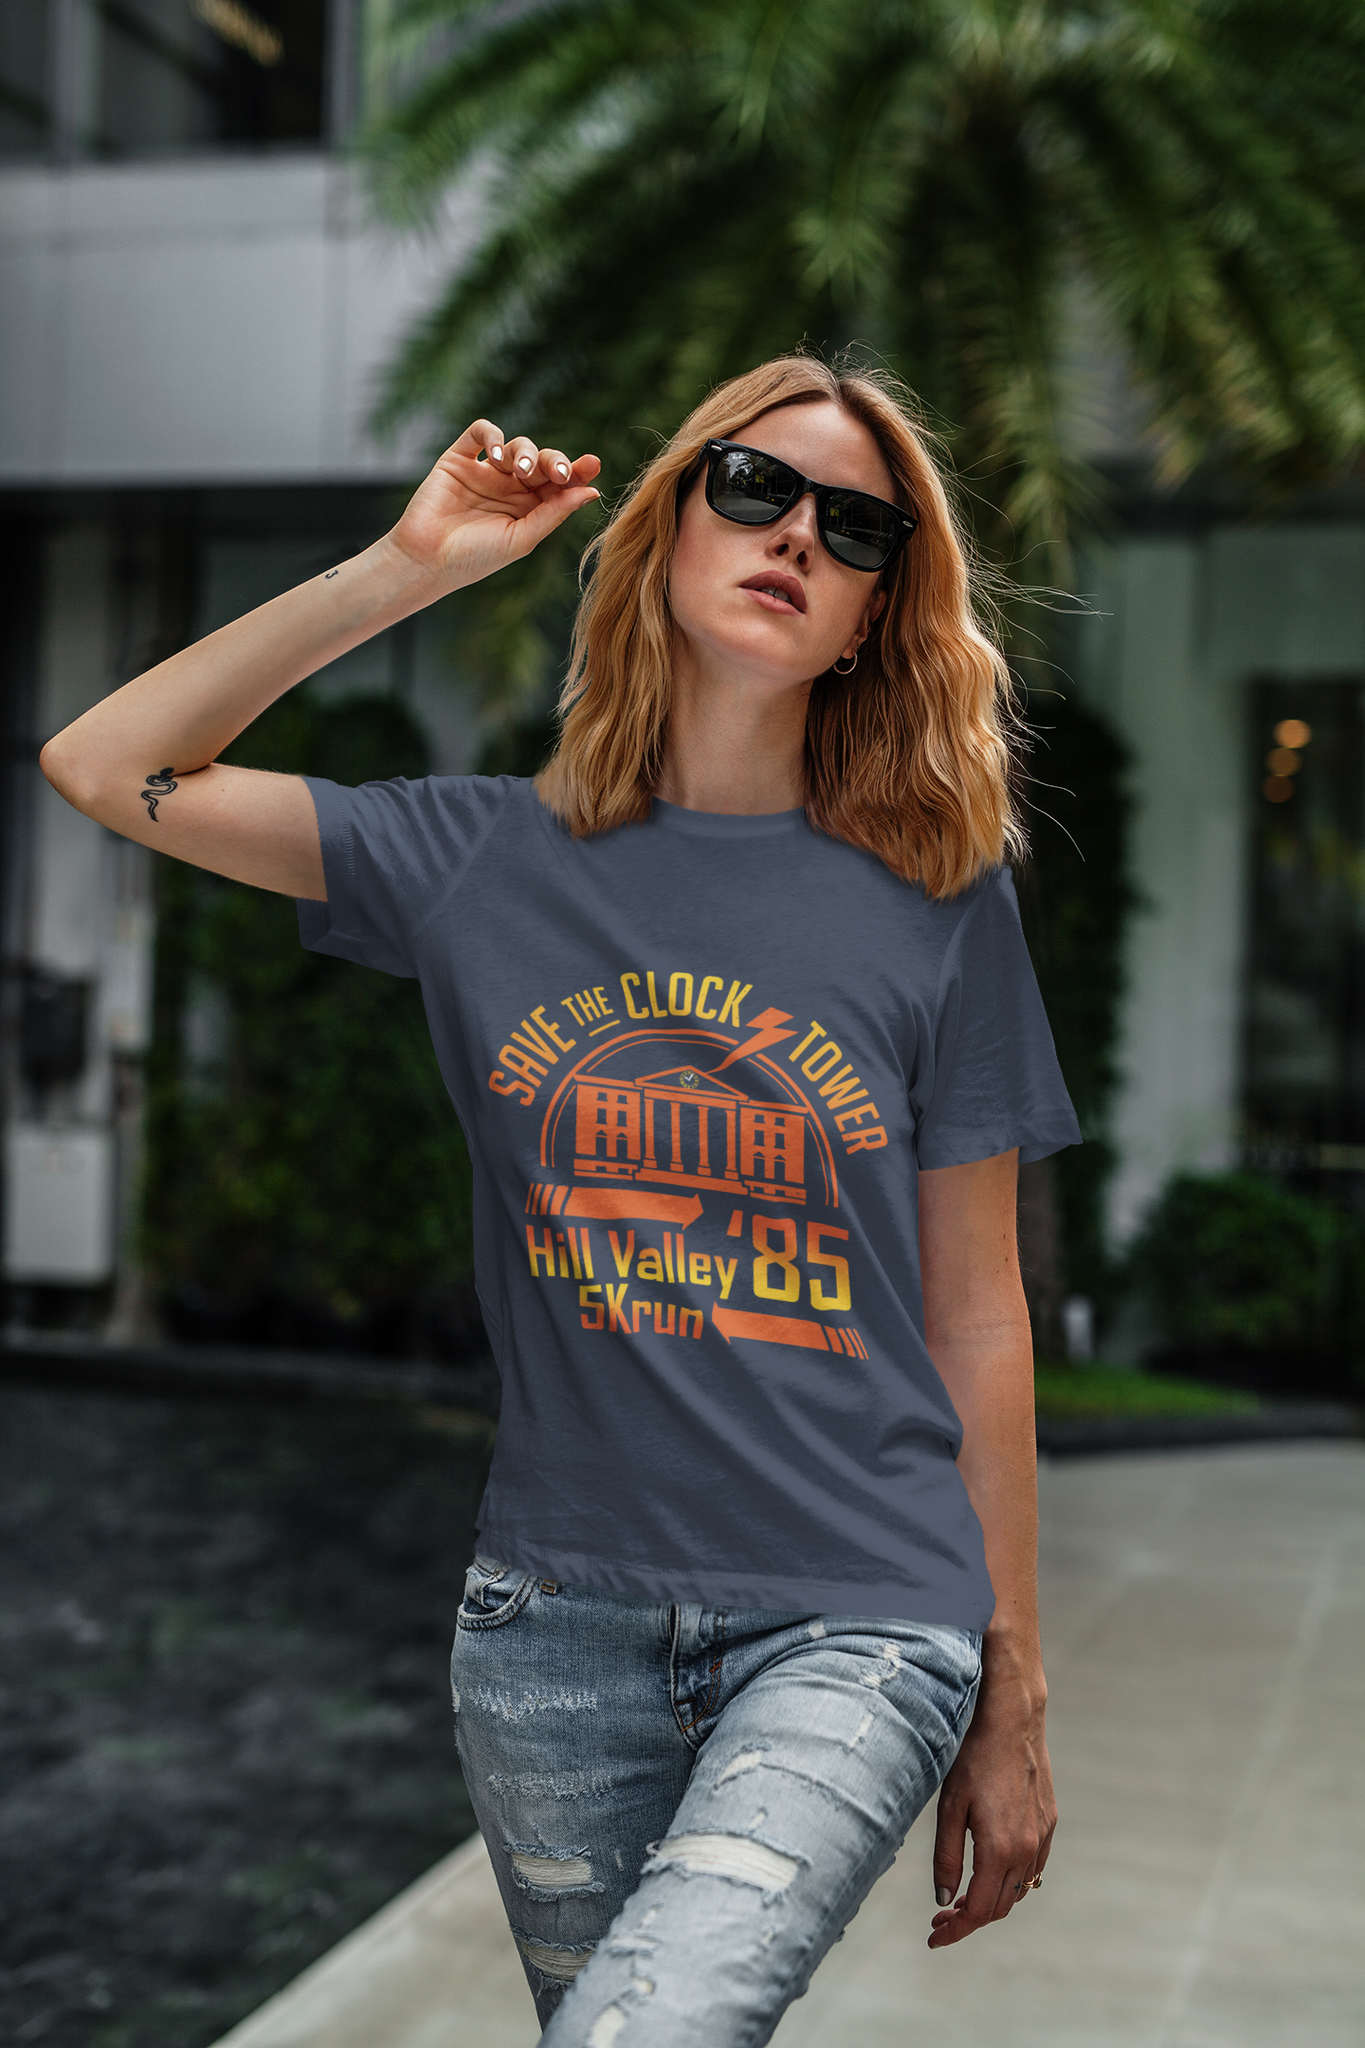 Back To The Future T Shirt, Save The Clock Tower Tshirt, Clocktower Lady T Shirt